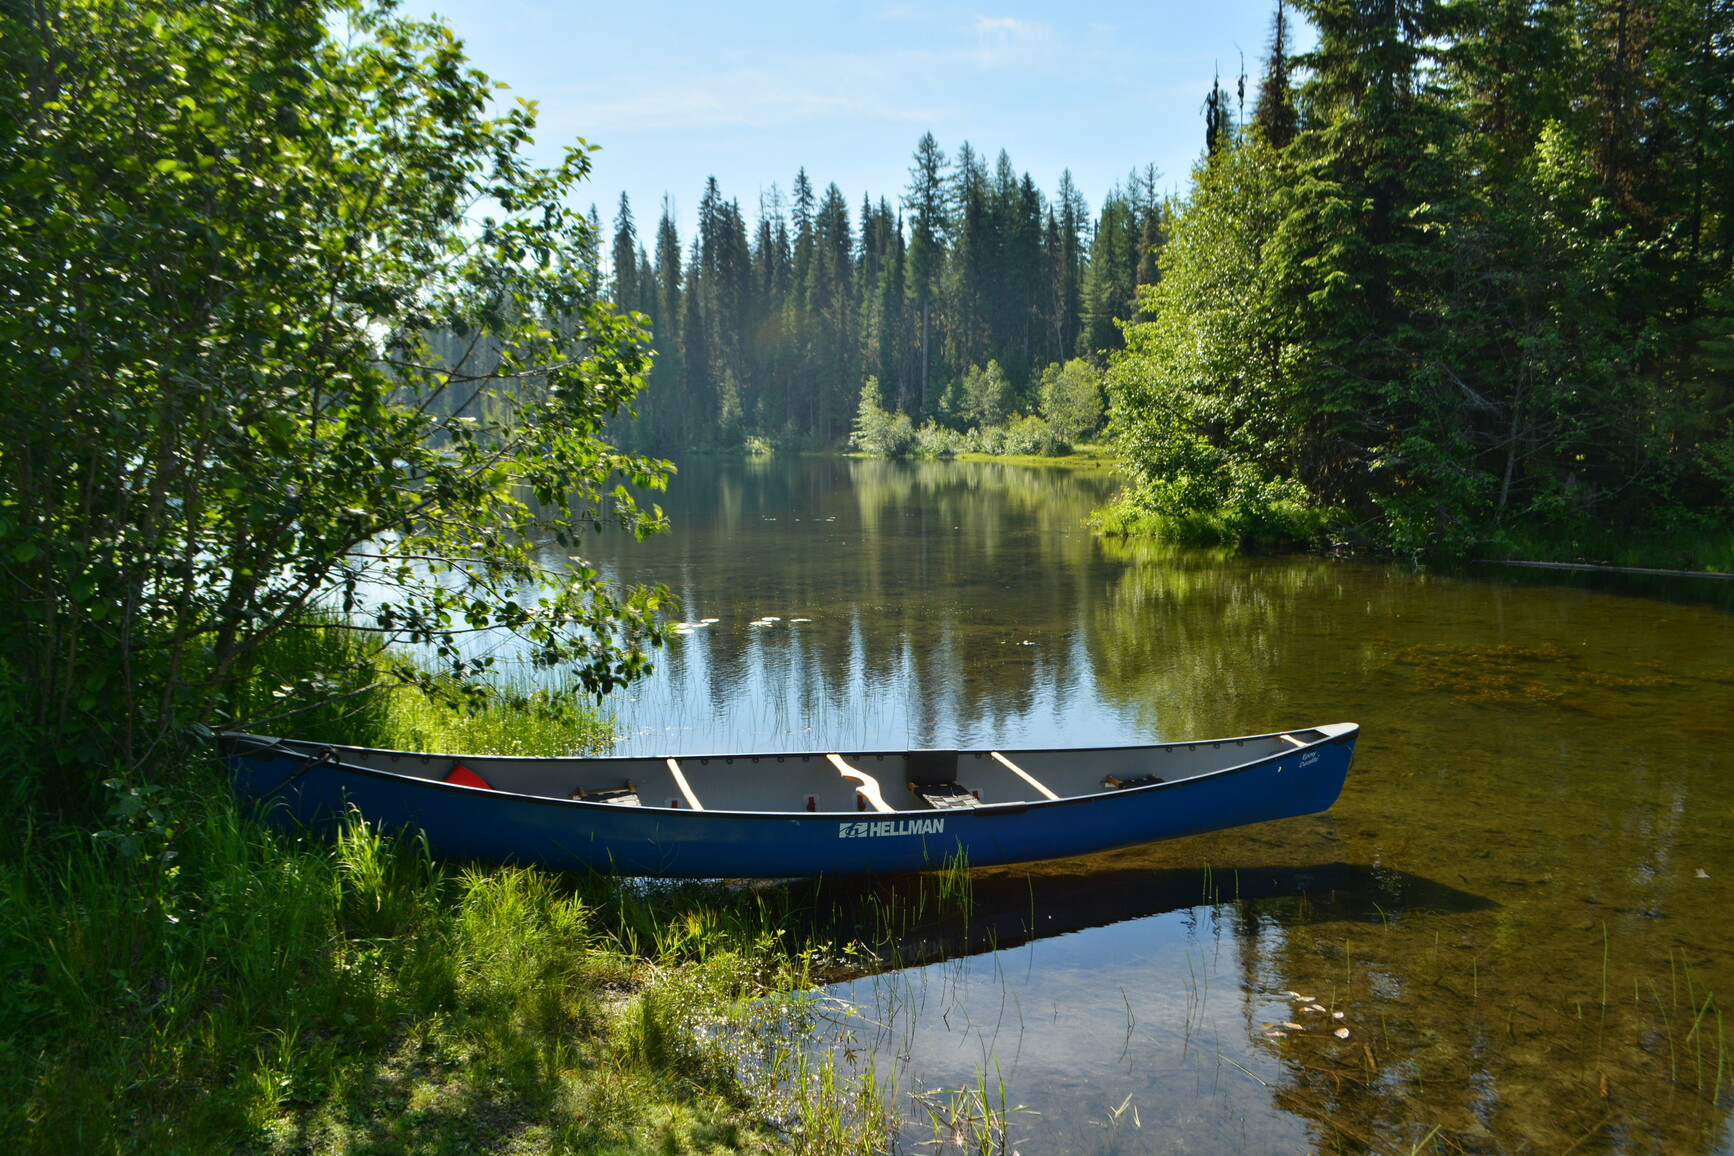 Third Lake - A view of the lake and surrounding forest. There is a canoe on the shore.